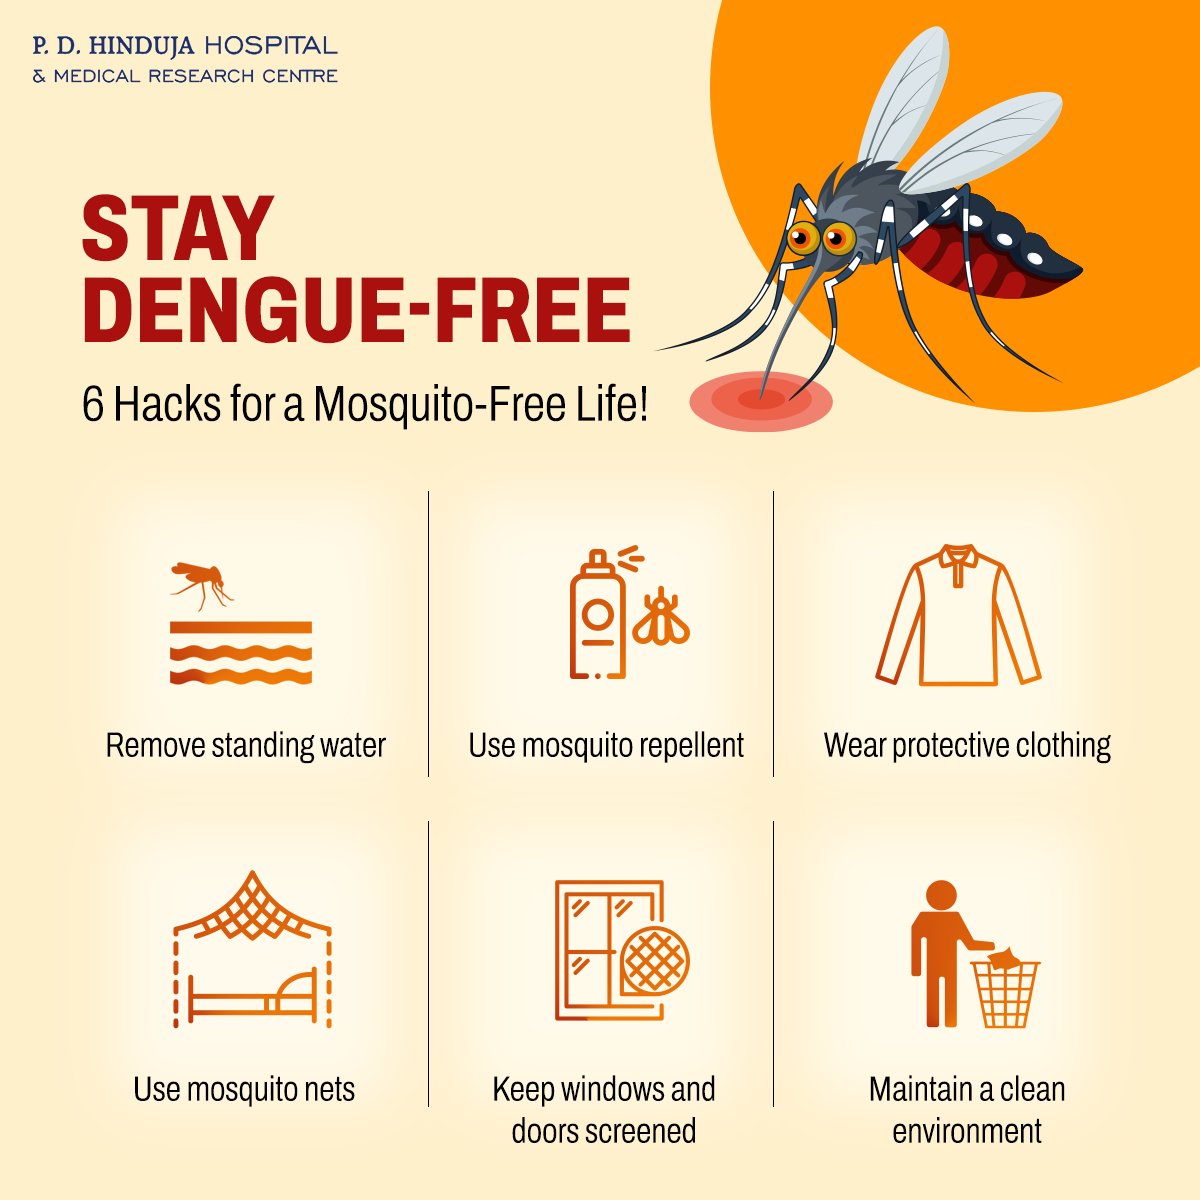 While many #dengue infections are asymptomatic or produce only mild illness, the virus can occasionally cause more severe cases & even death. Let’s eliminate the spread of dengue together by taking these precautions!

#PDHH #QualityHealthcareForAll #NationalDengueDay